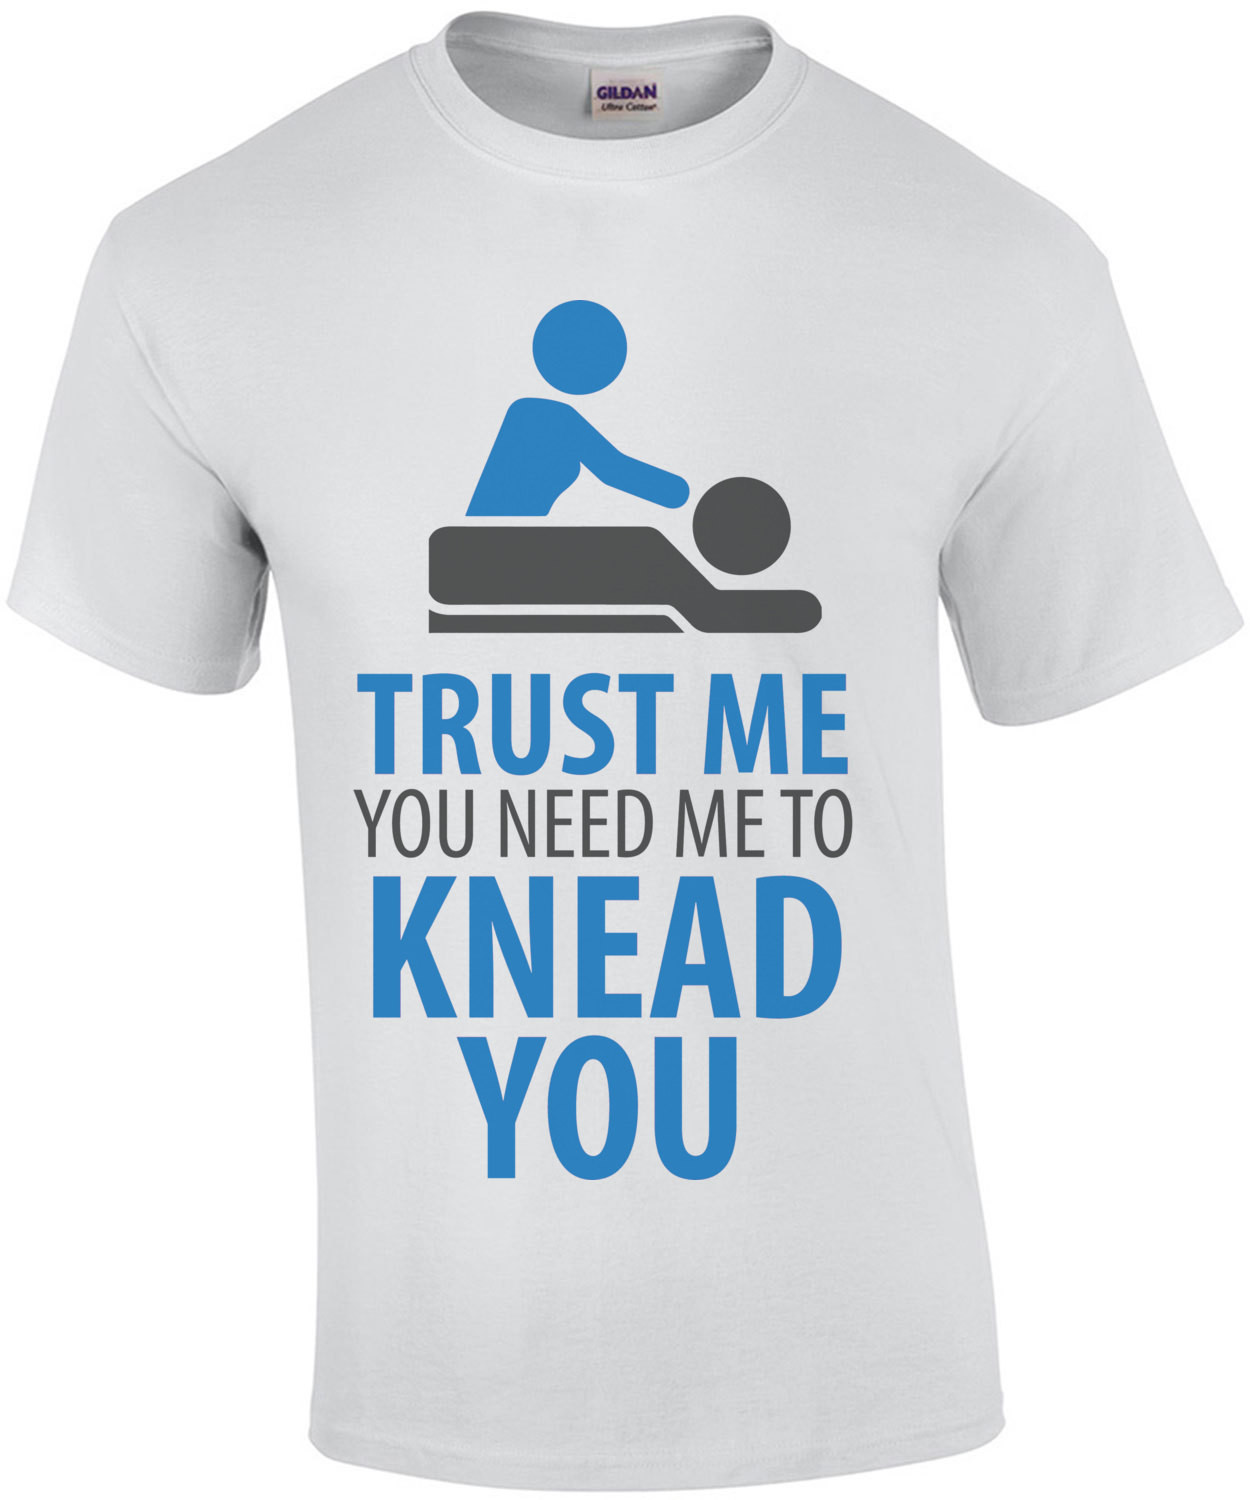 Trust me you need me to knead you - funny massage therapist - funny masseuse tshirt. 